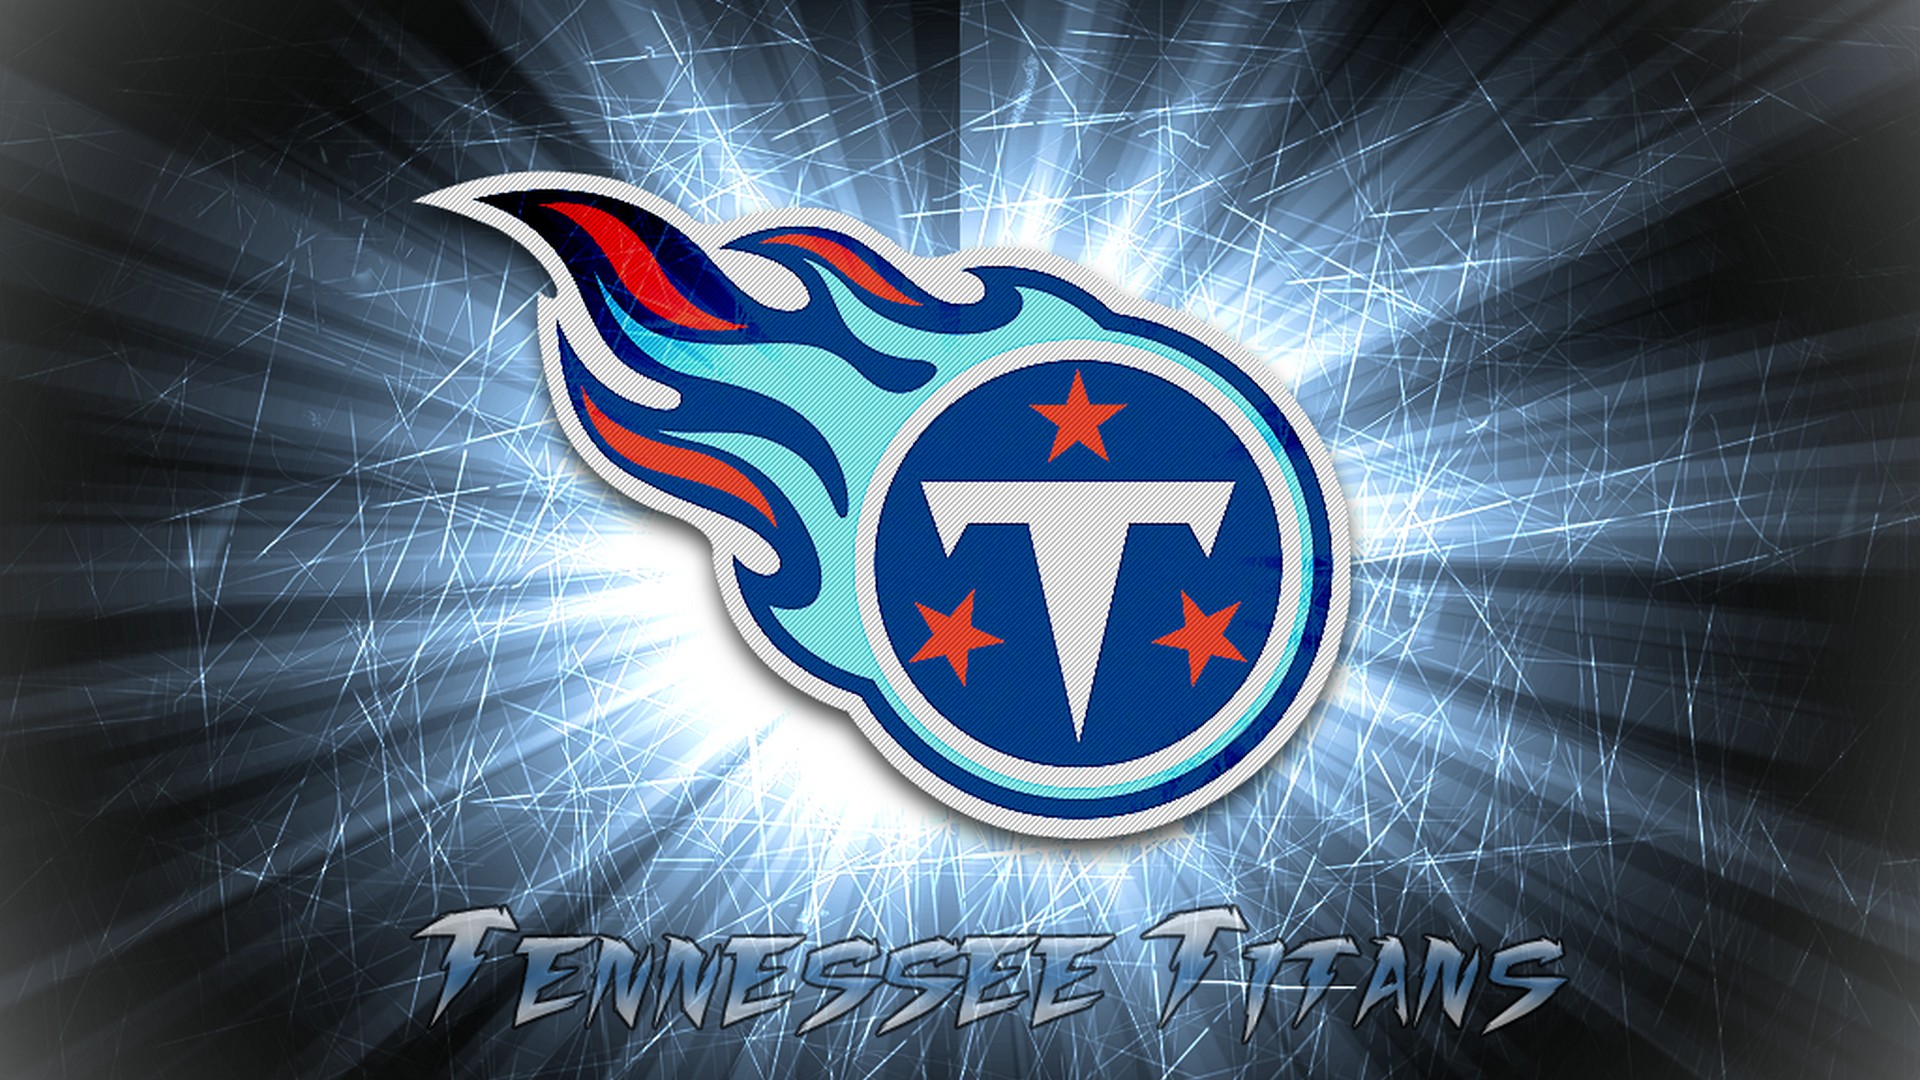 Tennessee Titans Wallpaper For Mac OS with high-resolution 1920x1080 pixel. Download and set as wallpaper for Desktop Computer, Apple iPhone X, XS Max, XR, 8, 7, 6, SE, iPad, Android